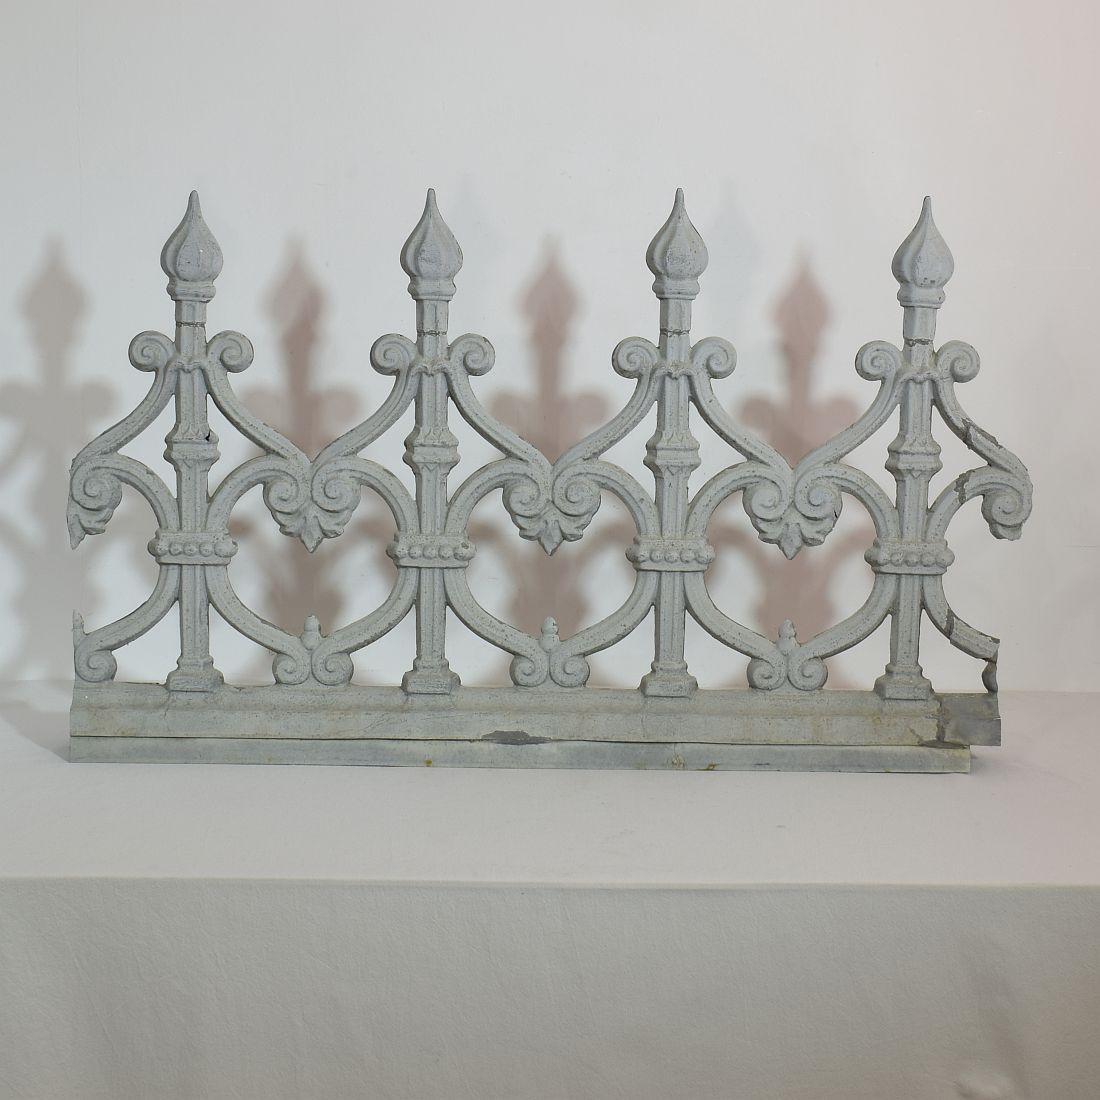 Beautiful pair of zinc roof ornaments/ finials.
France, circa 1850-1900. Weathered small losses and old repairs.
Measurement here below is individual.